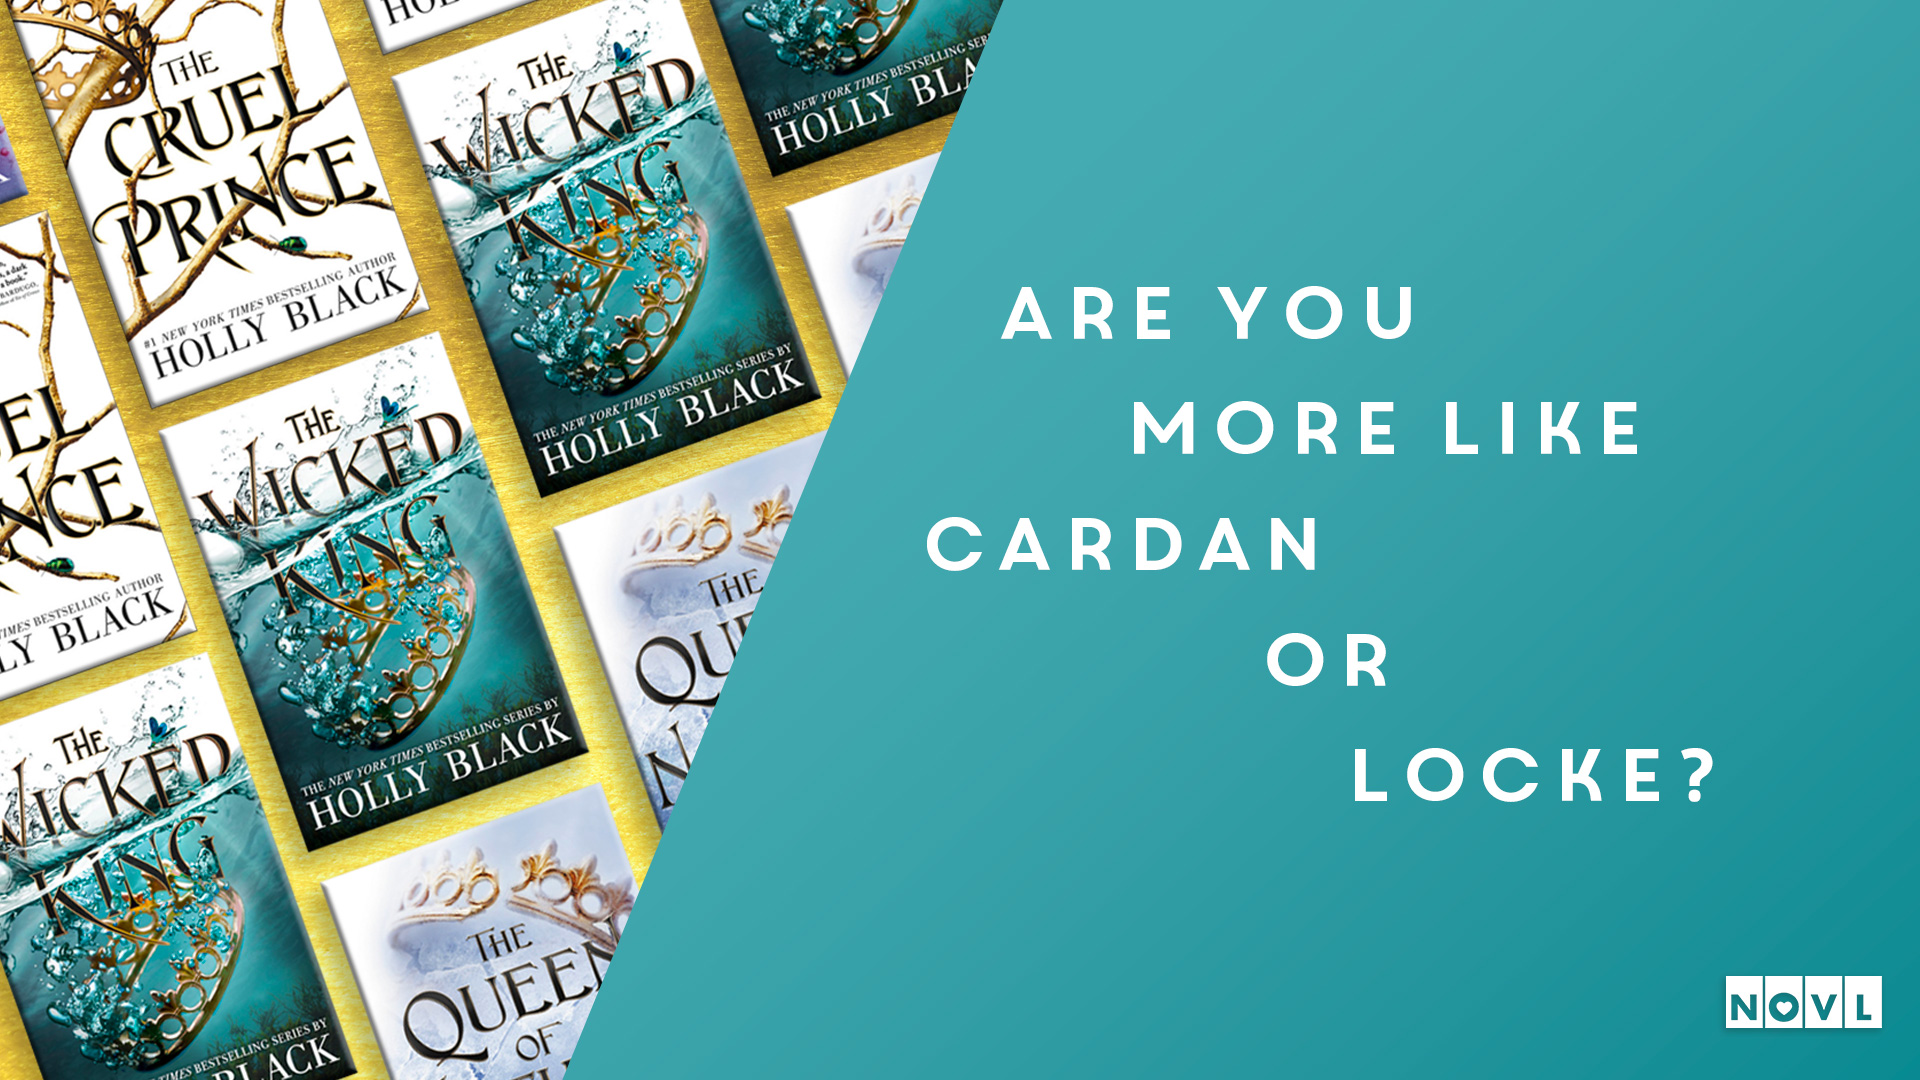 The NOVL Blog, Featured Image for Article: Are you more like Cardan or Locke?